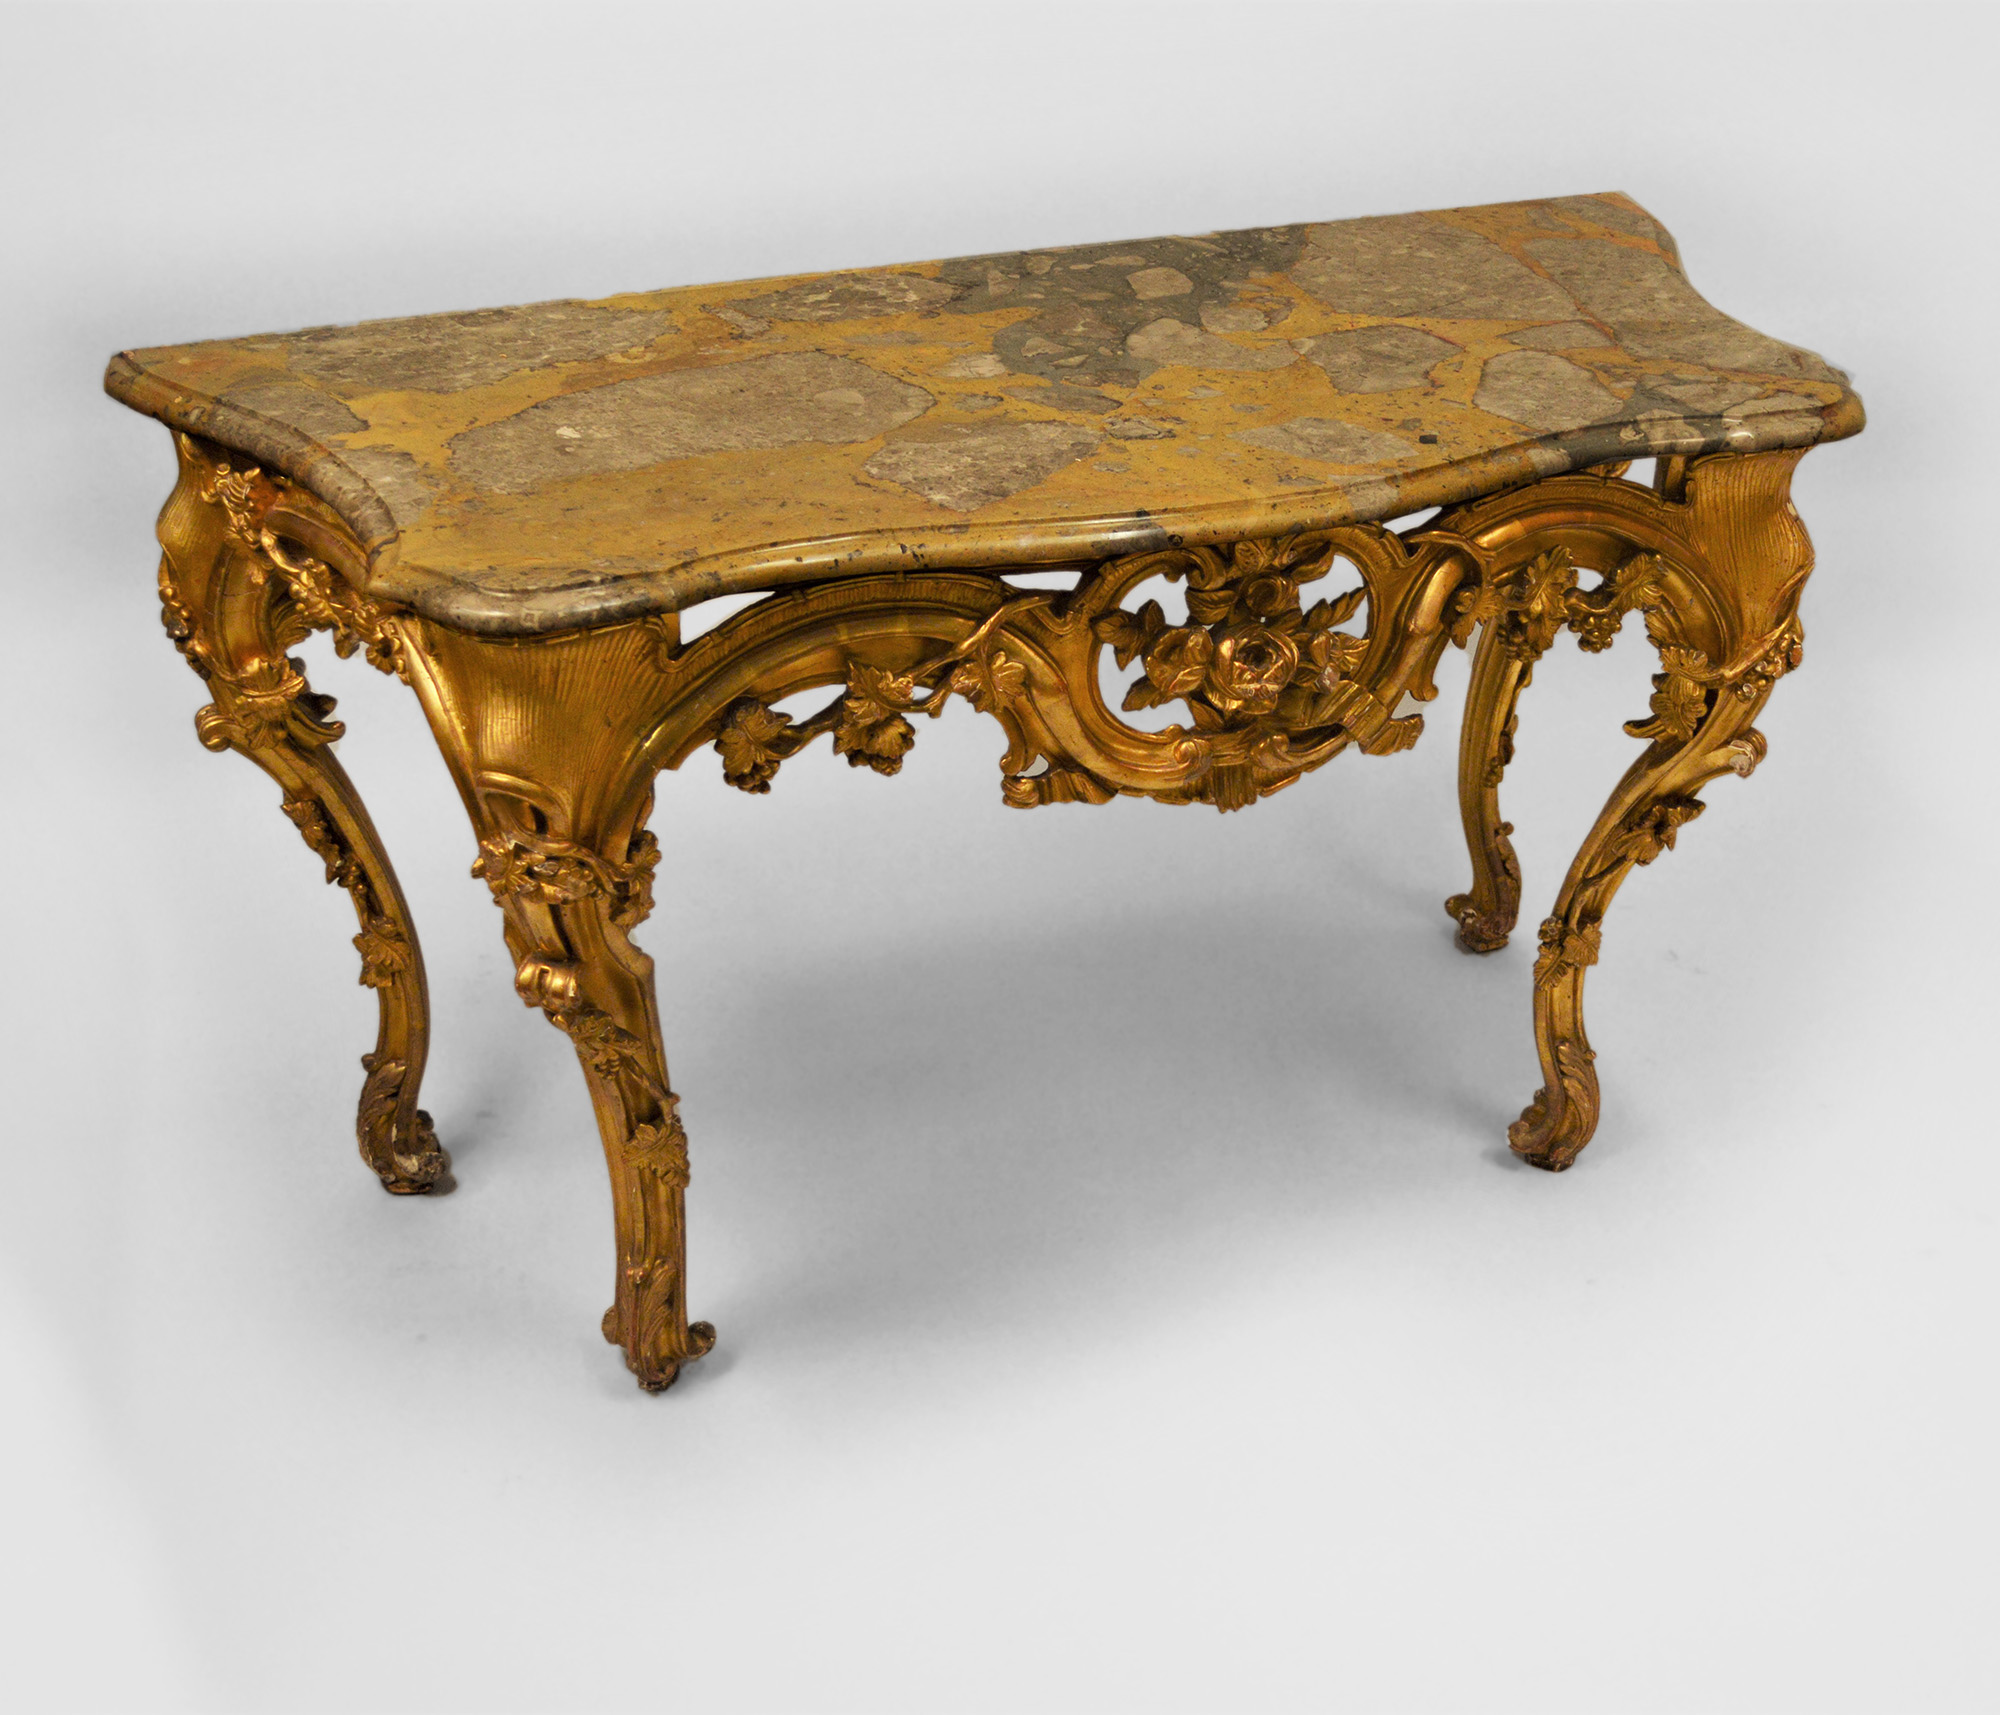 French, Louis XV-XVI Transition period console